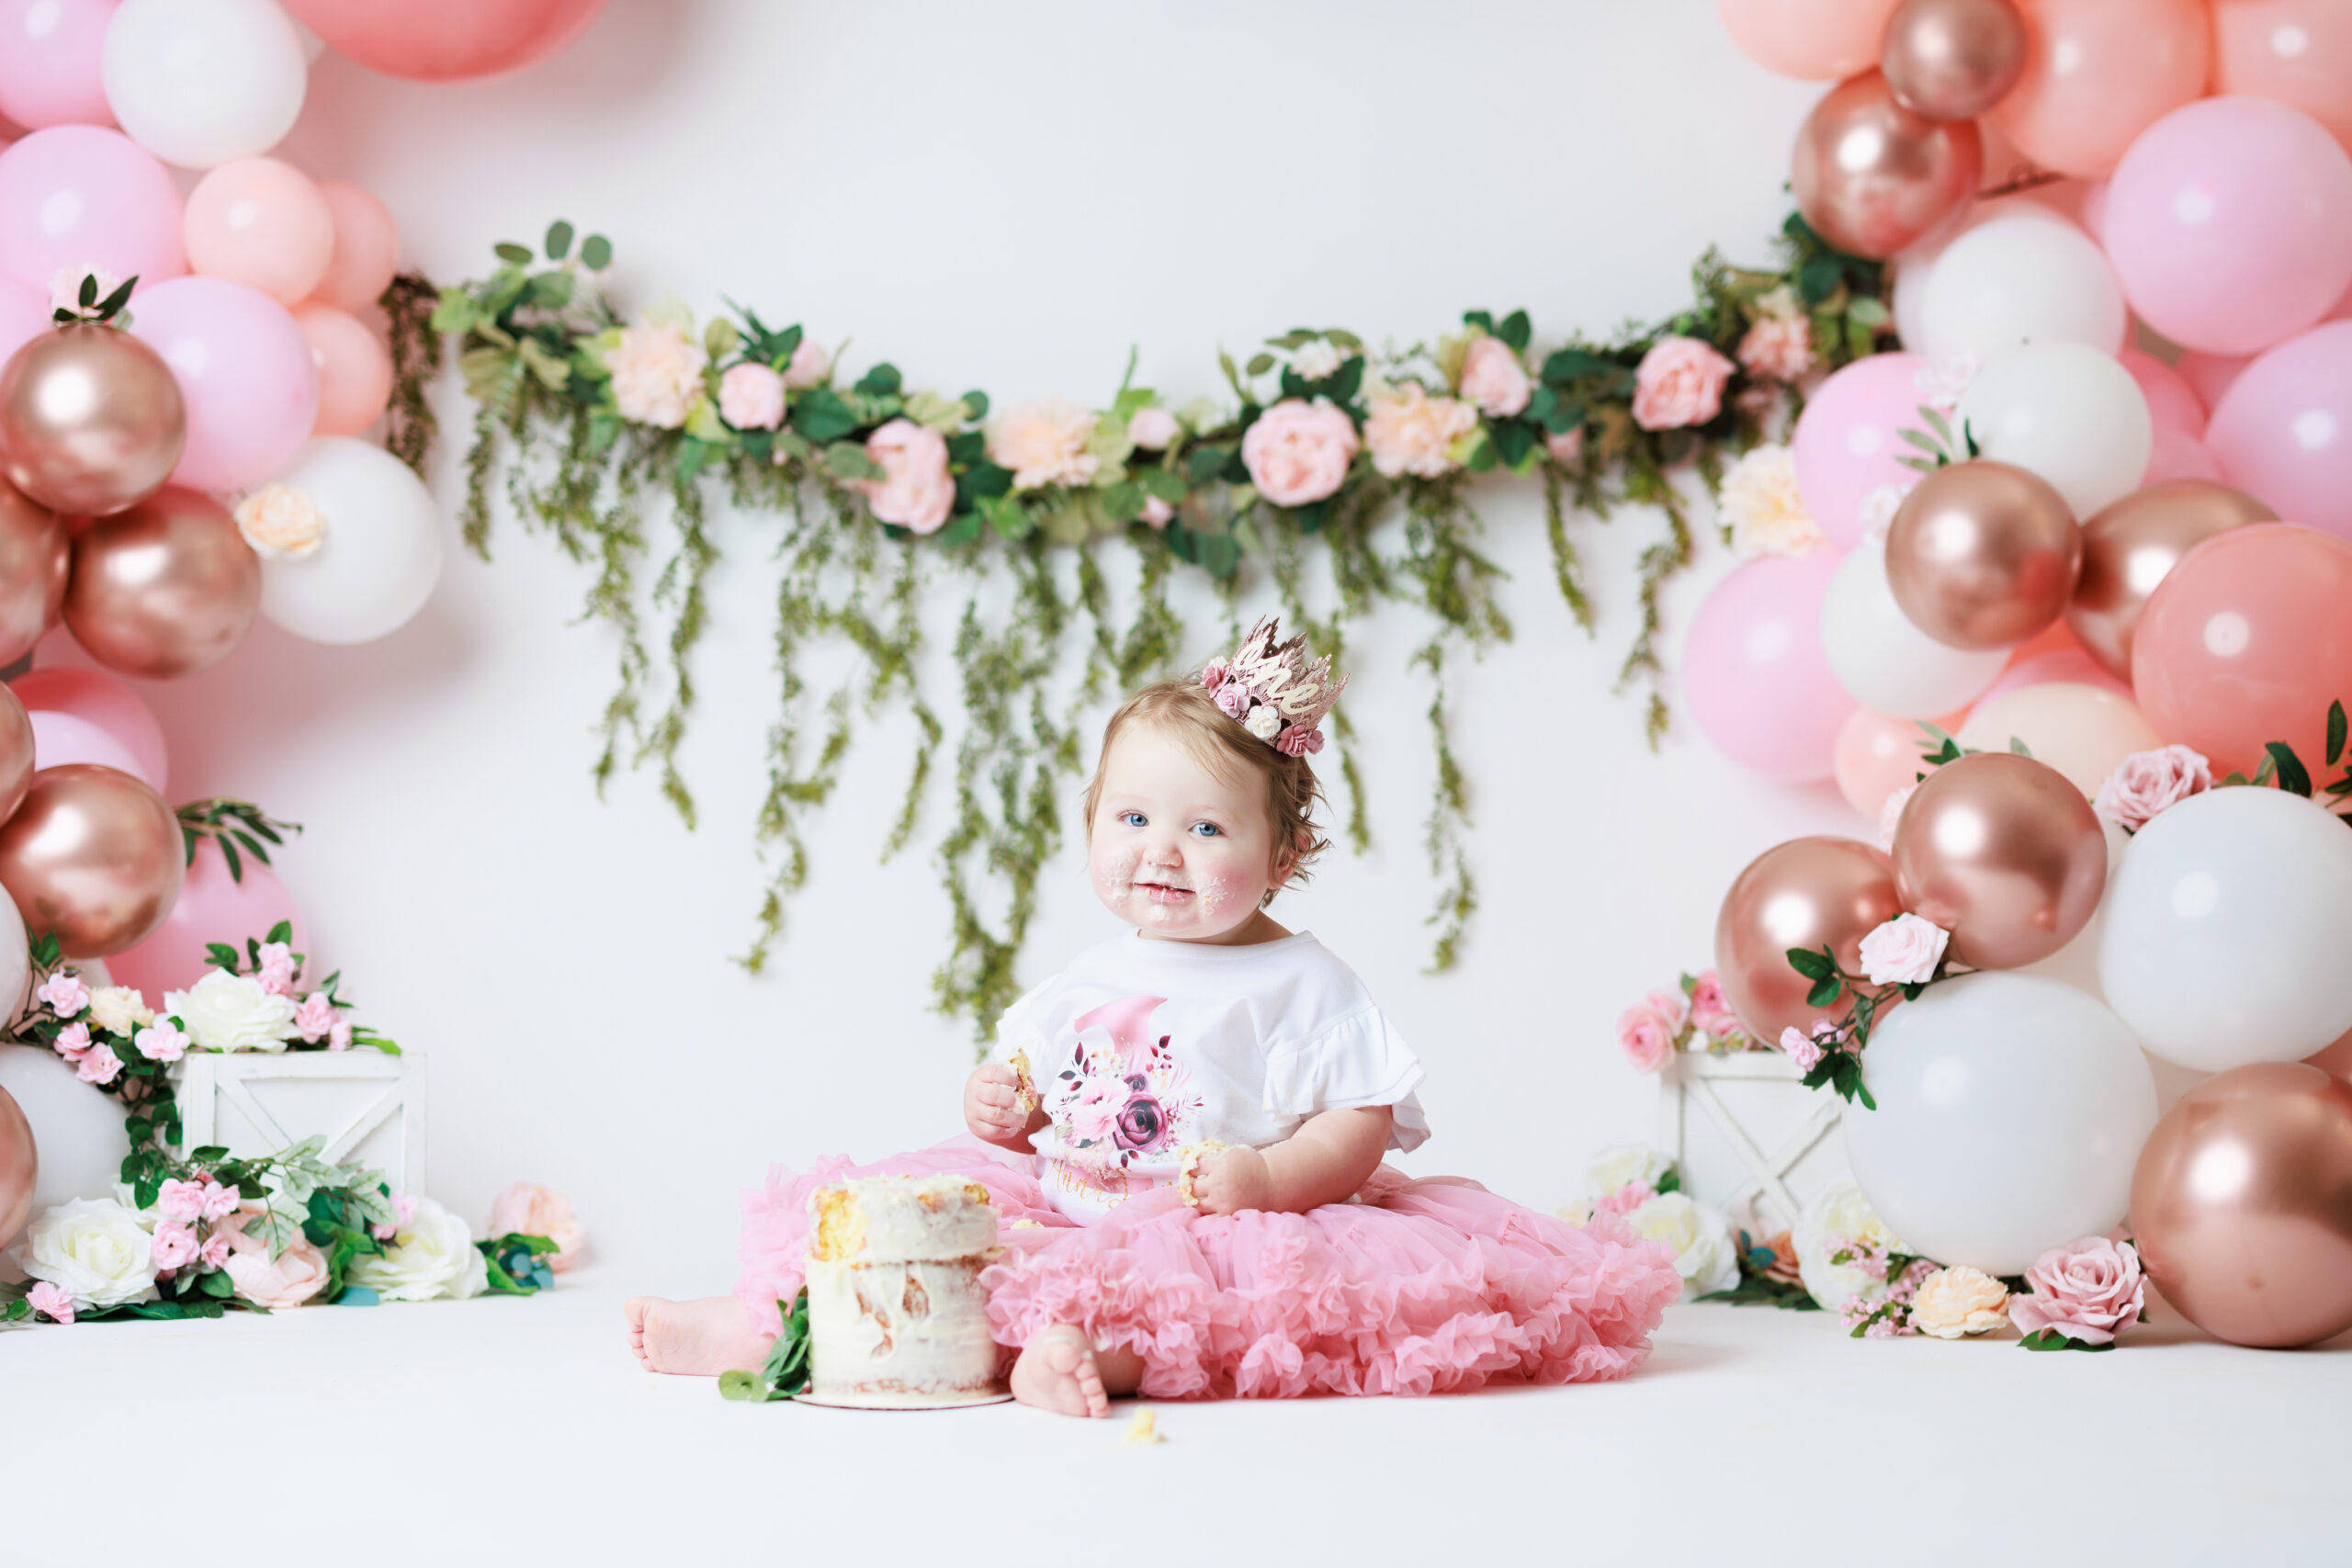 baby in tutu eating smash cake with flowers around her